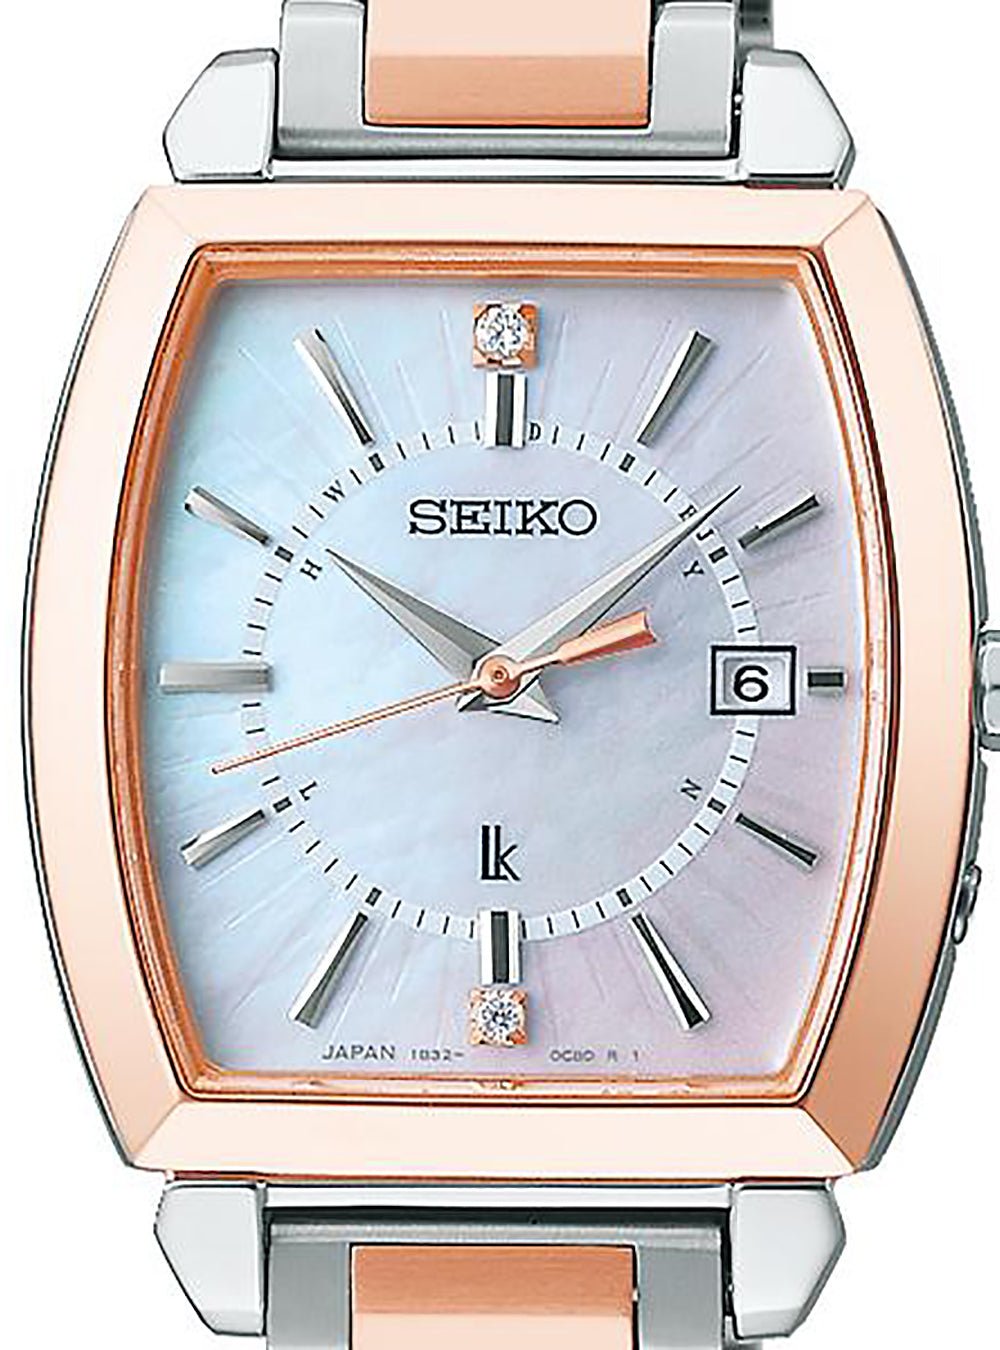 SEIKO LUKIA I COLLECTION SSQW068 ELAIZA IKEDA LIMITED EDITION MADE IN JAPAN  JDM